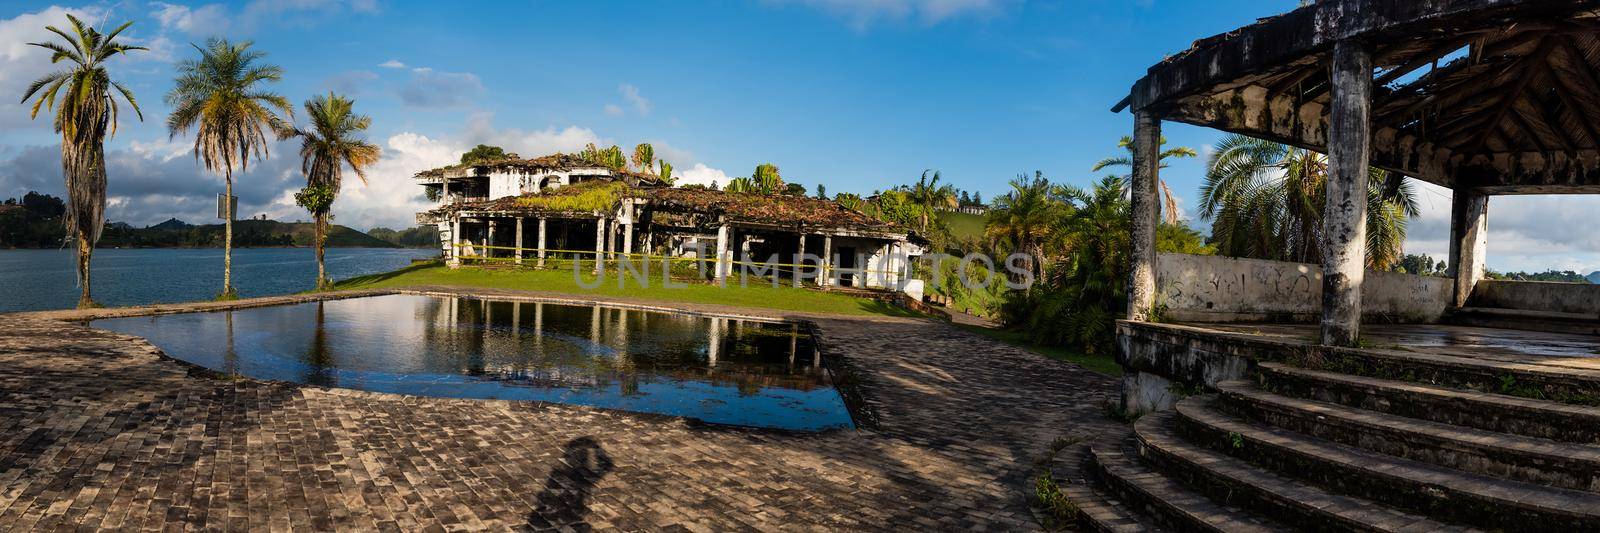 Pablo Escobar's old estate La Manuela in ruin with palm trees pool and river in view. Panoramic view by jyurinko